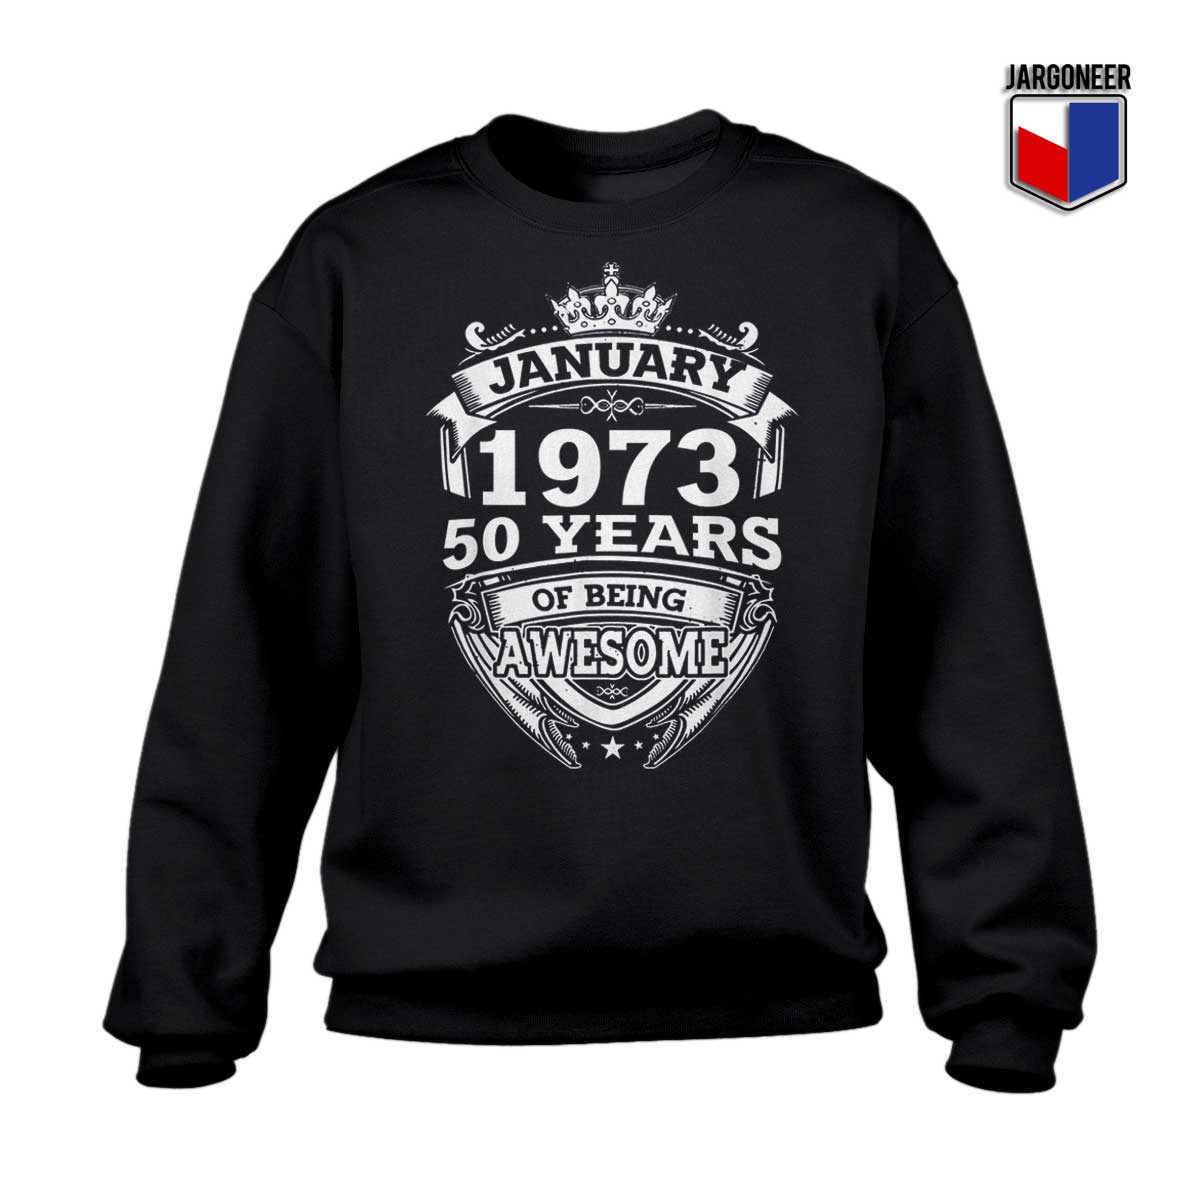 January 1973 50 Years Of Being Awesome Sweatshirt - Shop Unique Graphic Cool Shirt Designs